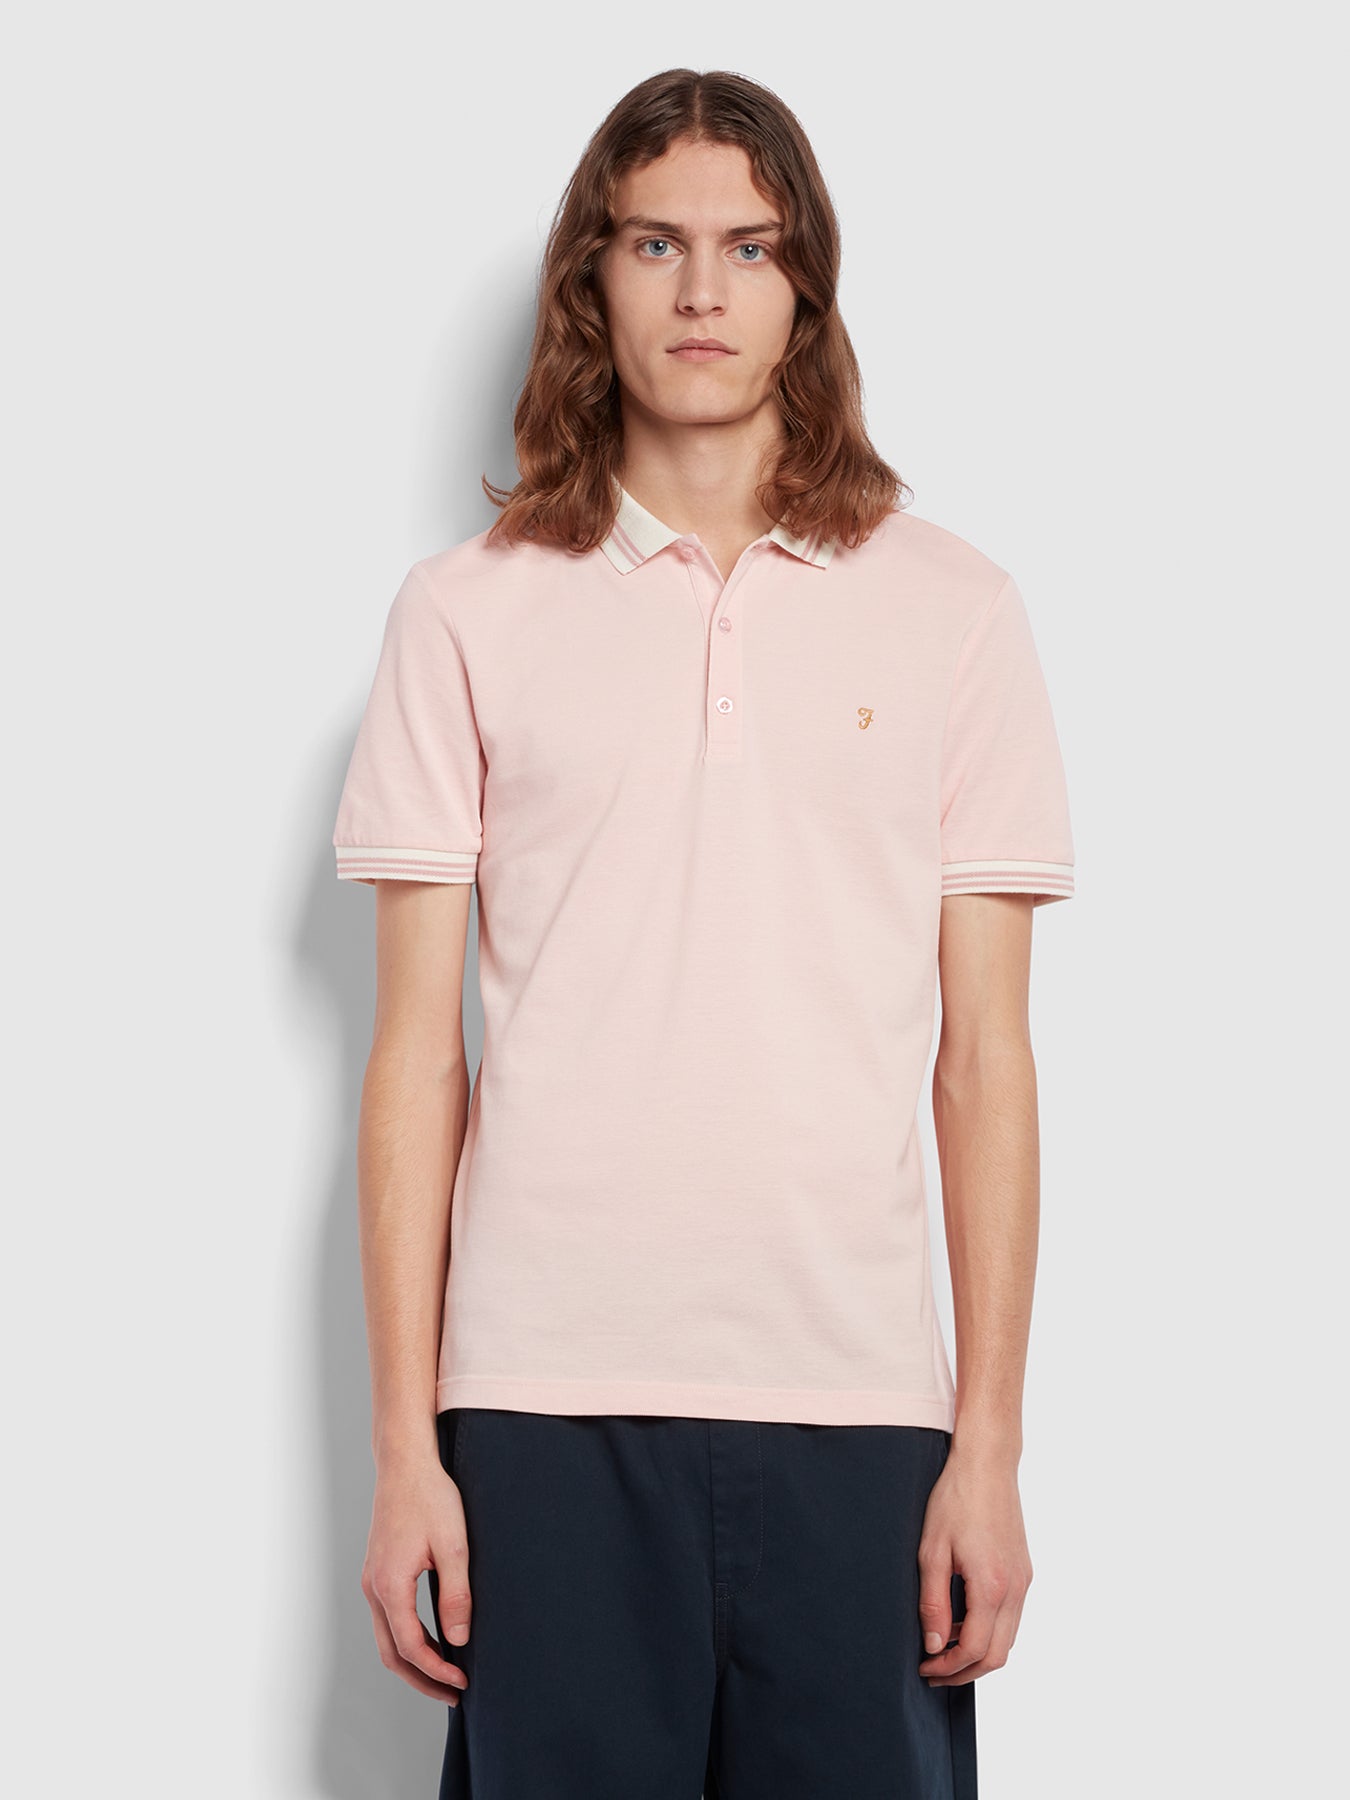 View Farah Stanton Slim Fit Short Sleeve Tipped Polo Shirt Pink Mens information